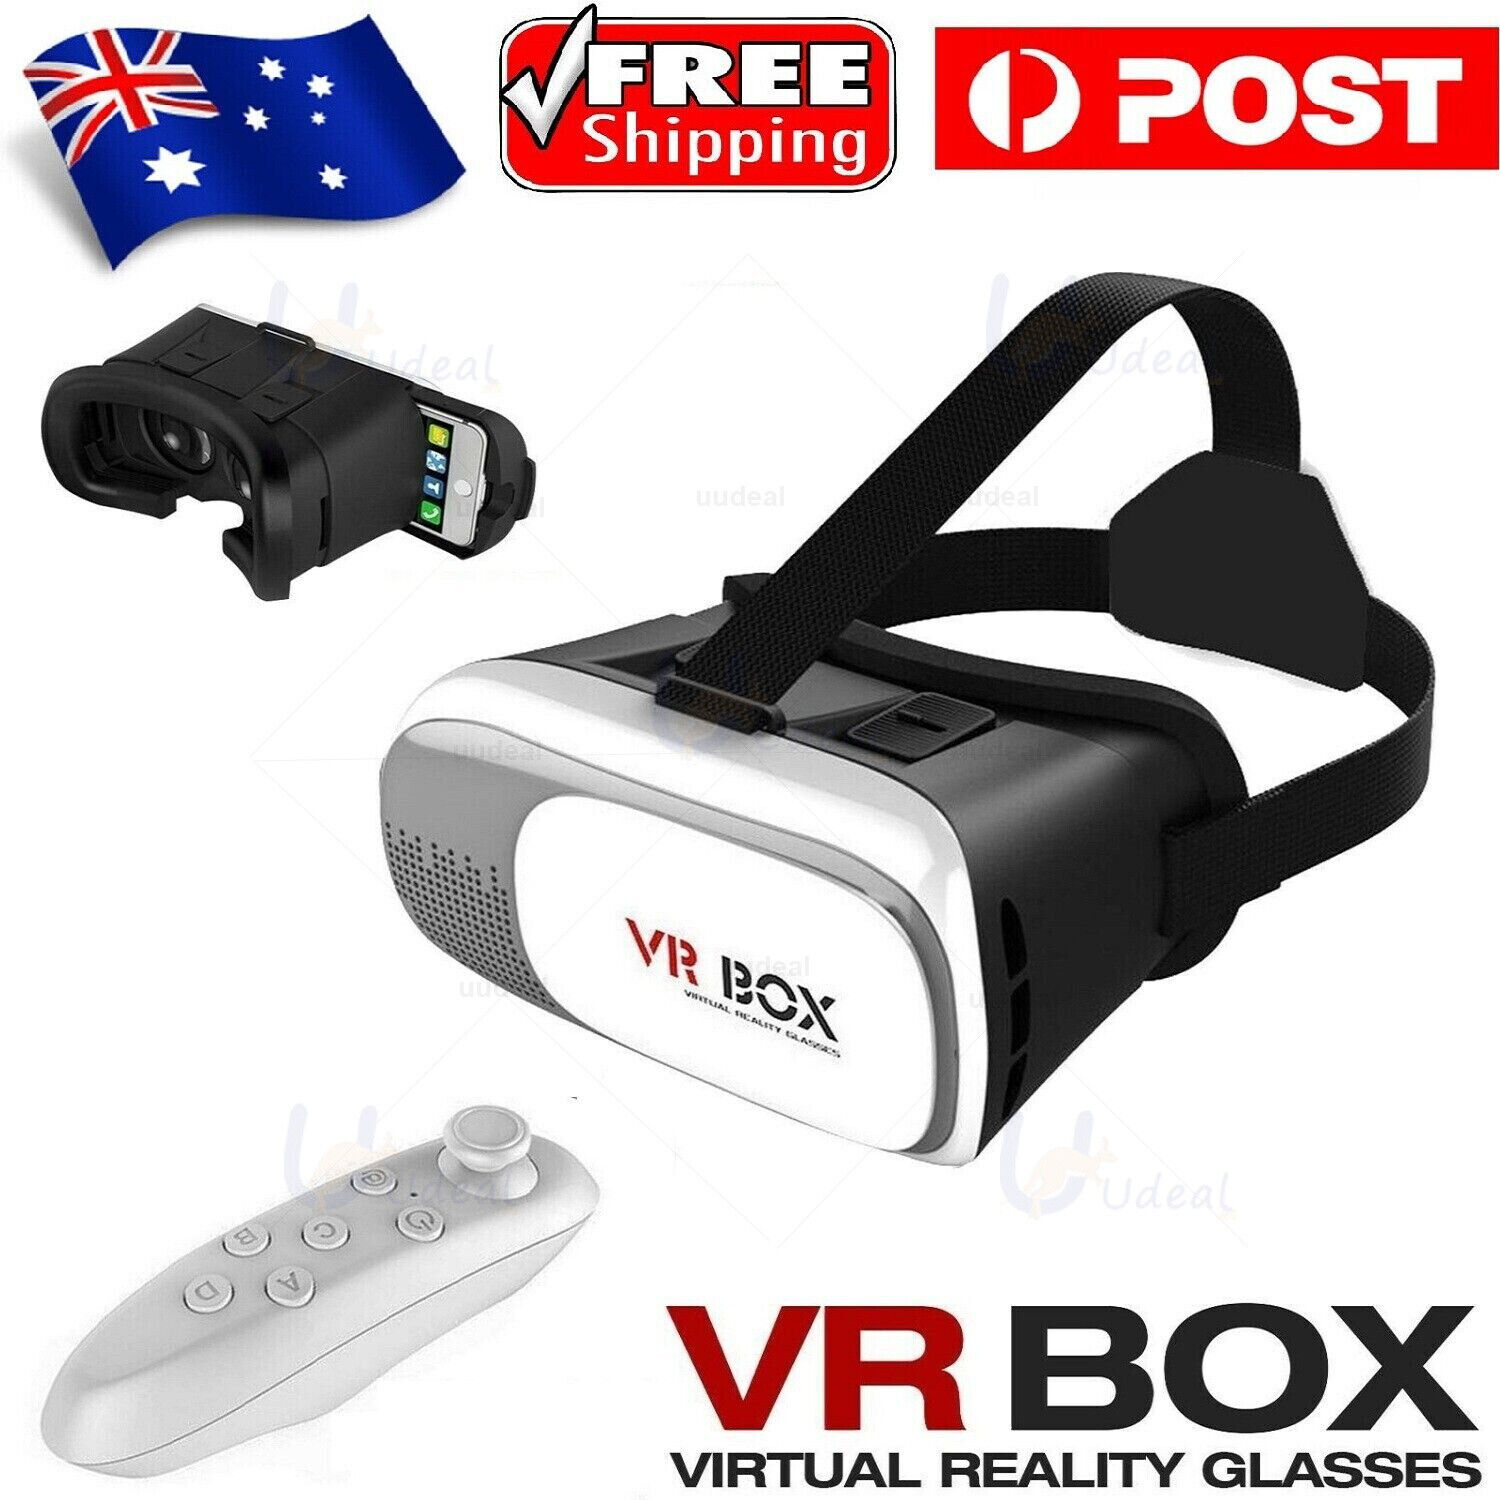 NEW VR BOX Headset 2.0 Virtual Reality 3D Glasses Goggles Helmet For  smartphone